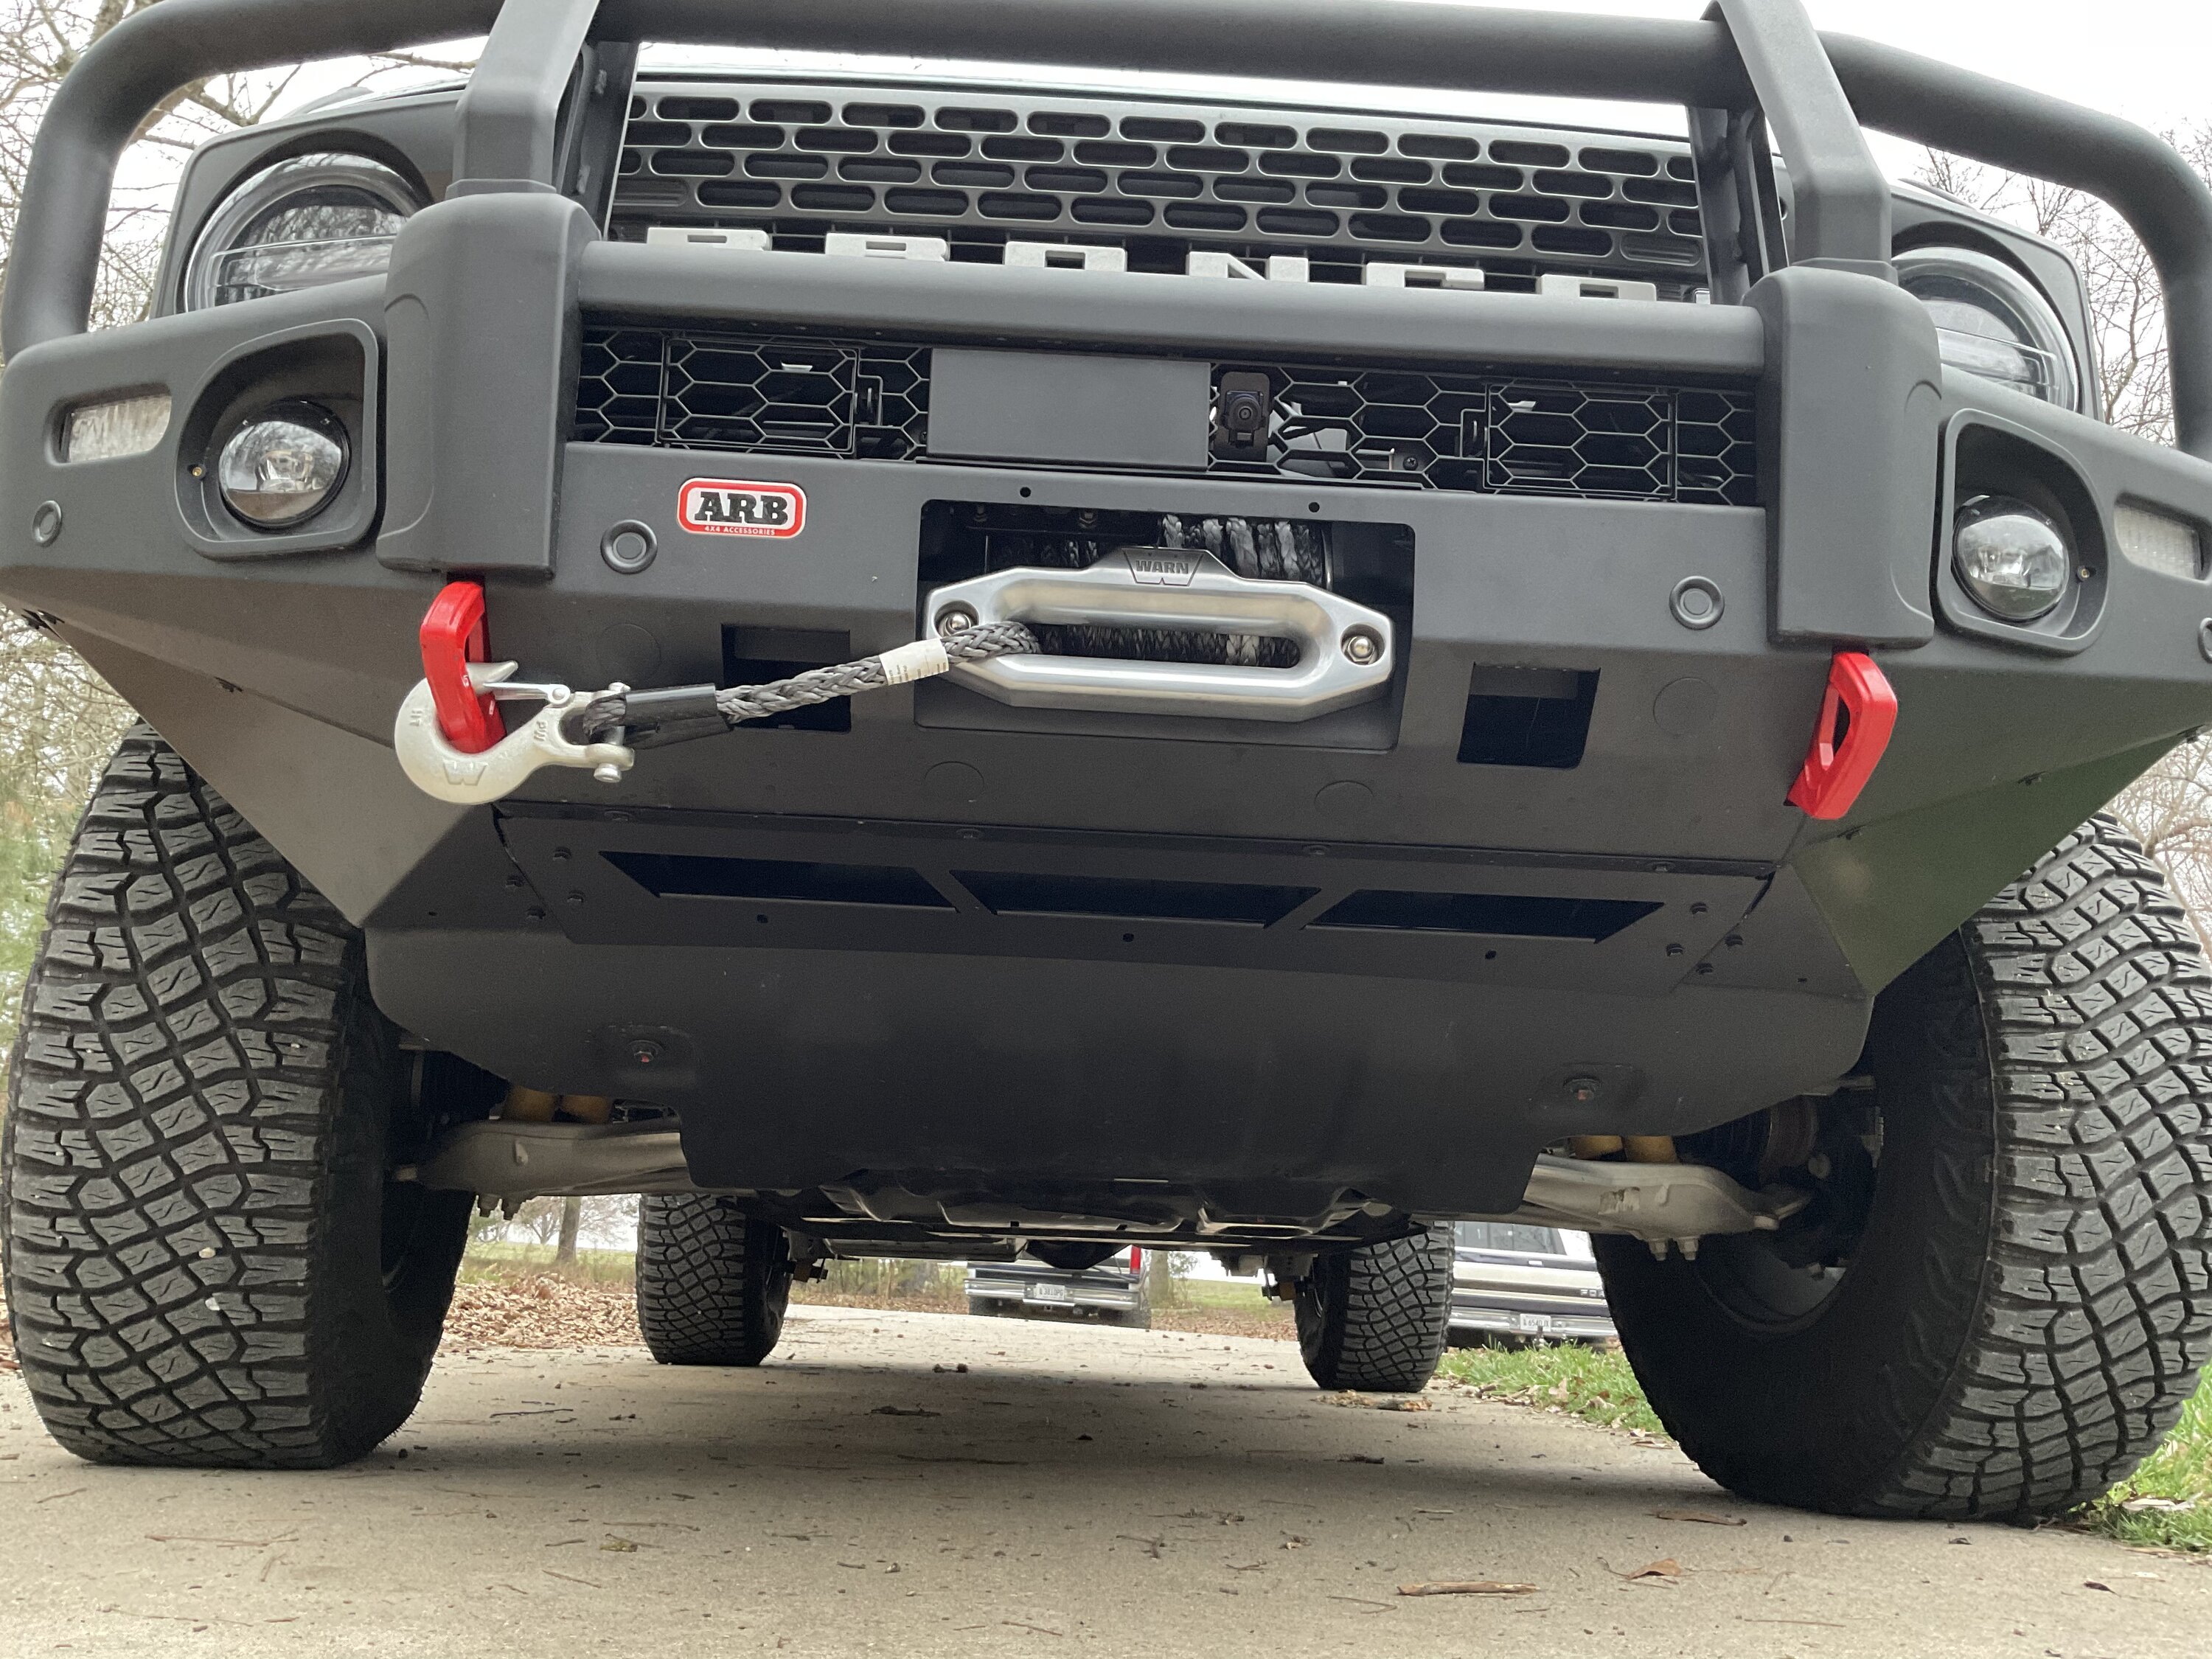 Ford Bronco ARB Bumper Line Up for Your Ford Bronco 08B0588B-E7AF-40D3-A03D-373BC2F48CE4